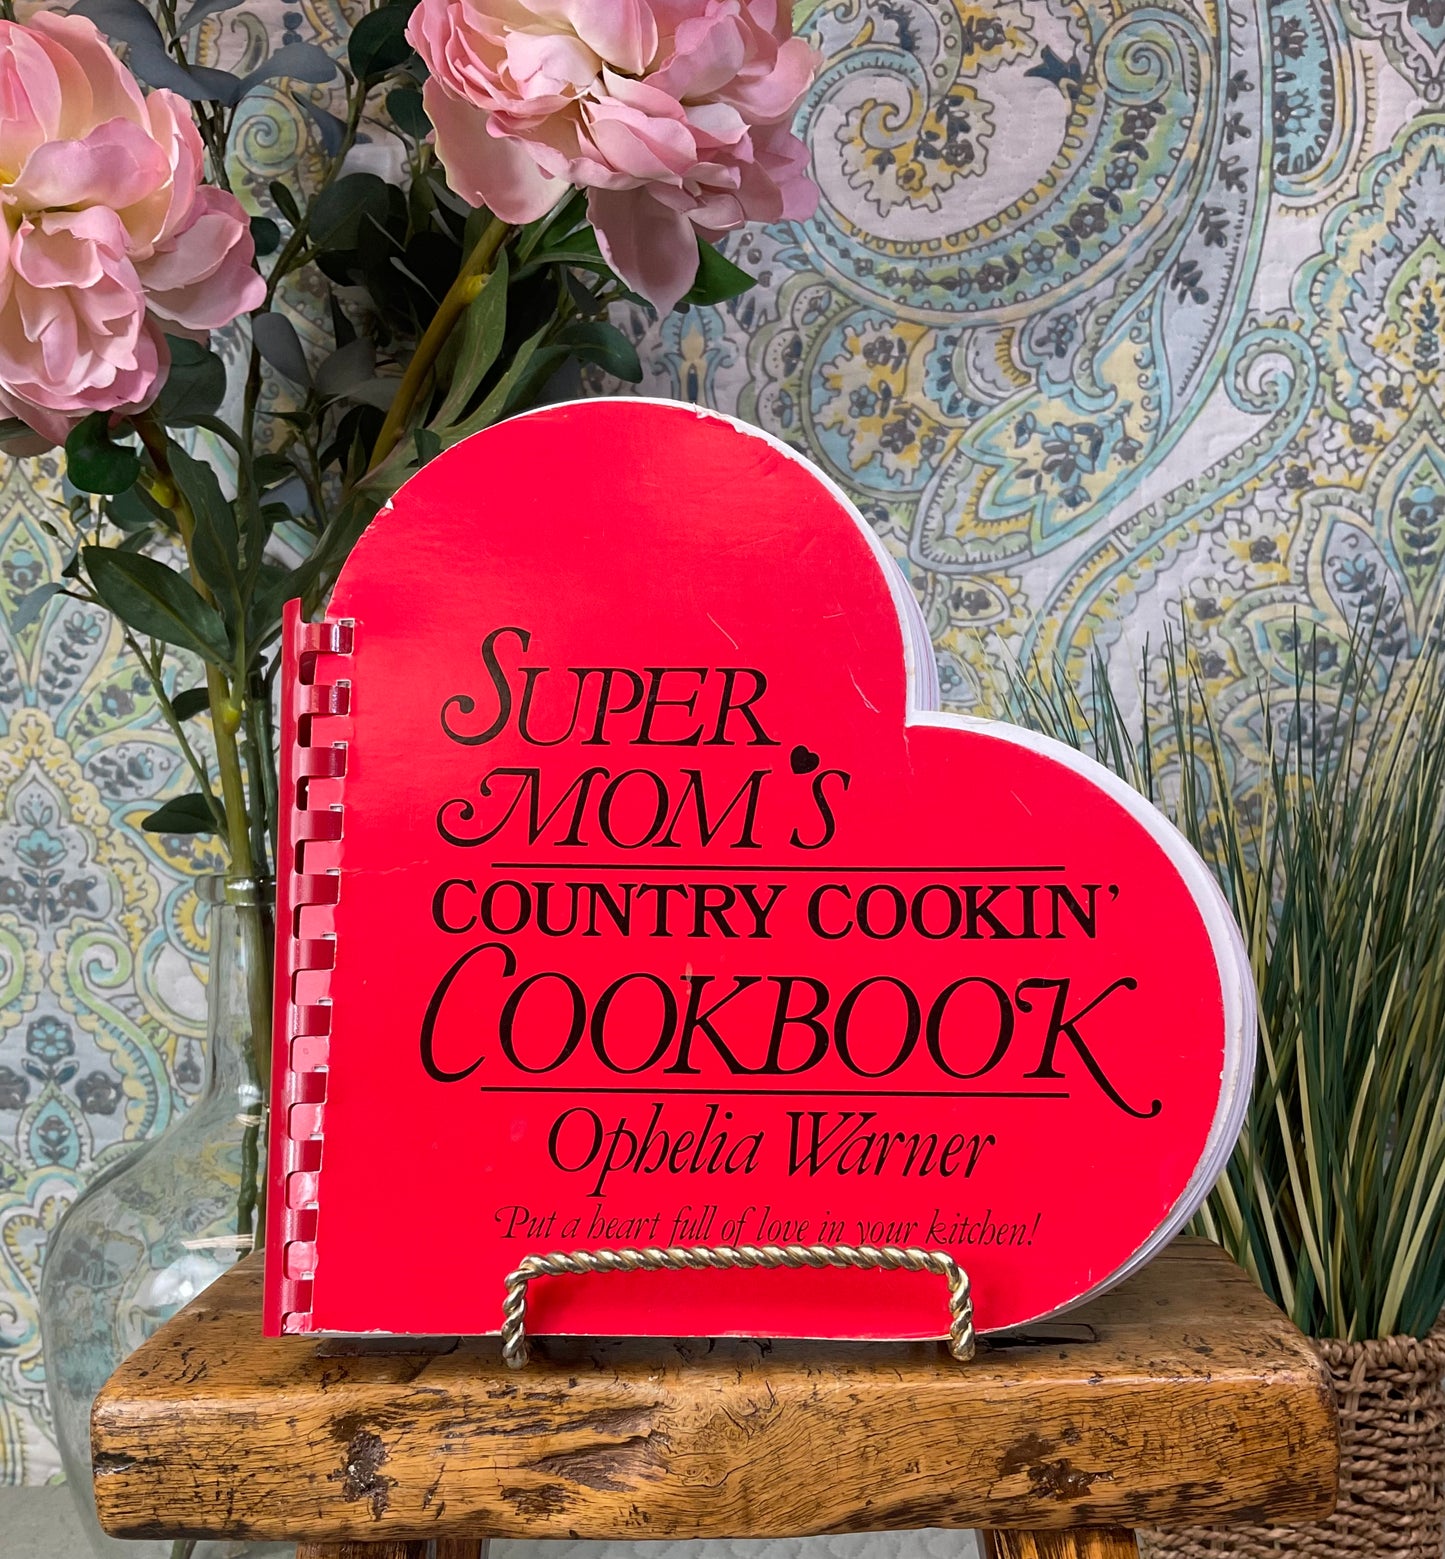 Super Mom's Country Cookin' Cookbook by Ophelia Warner